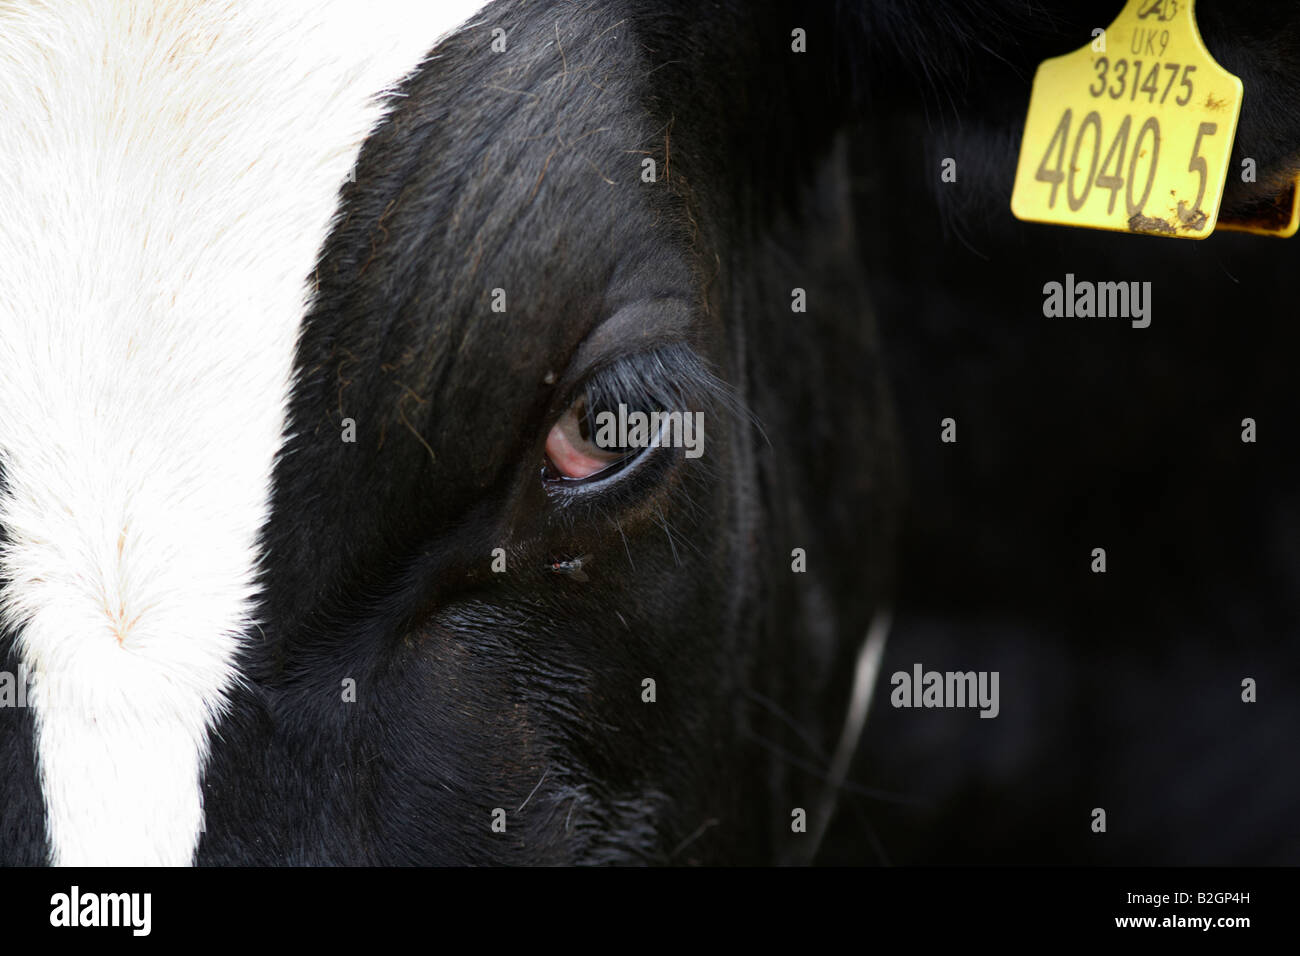 close up of head eye and ear identification tag of a friesian cow known as holsteins in north america Stock Photo